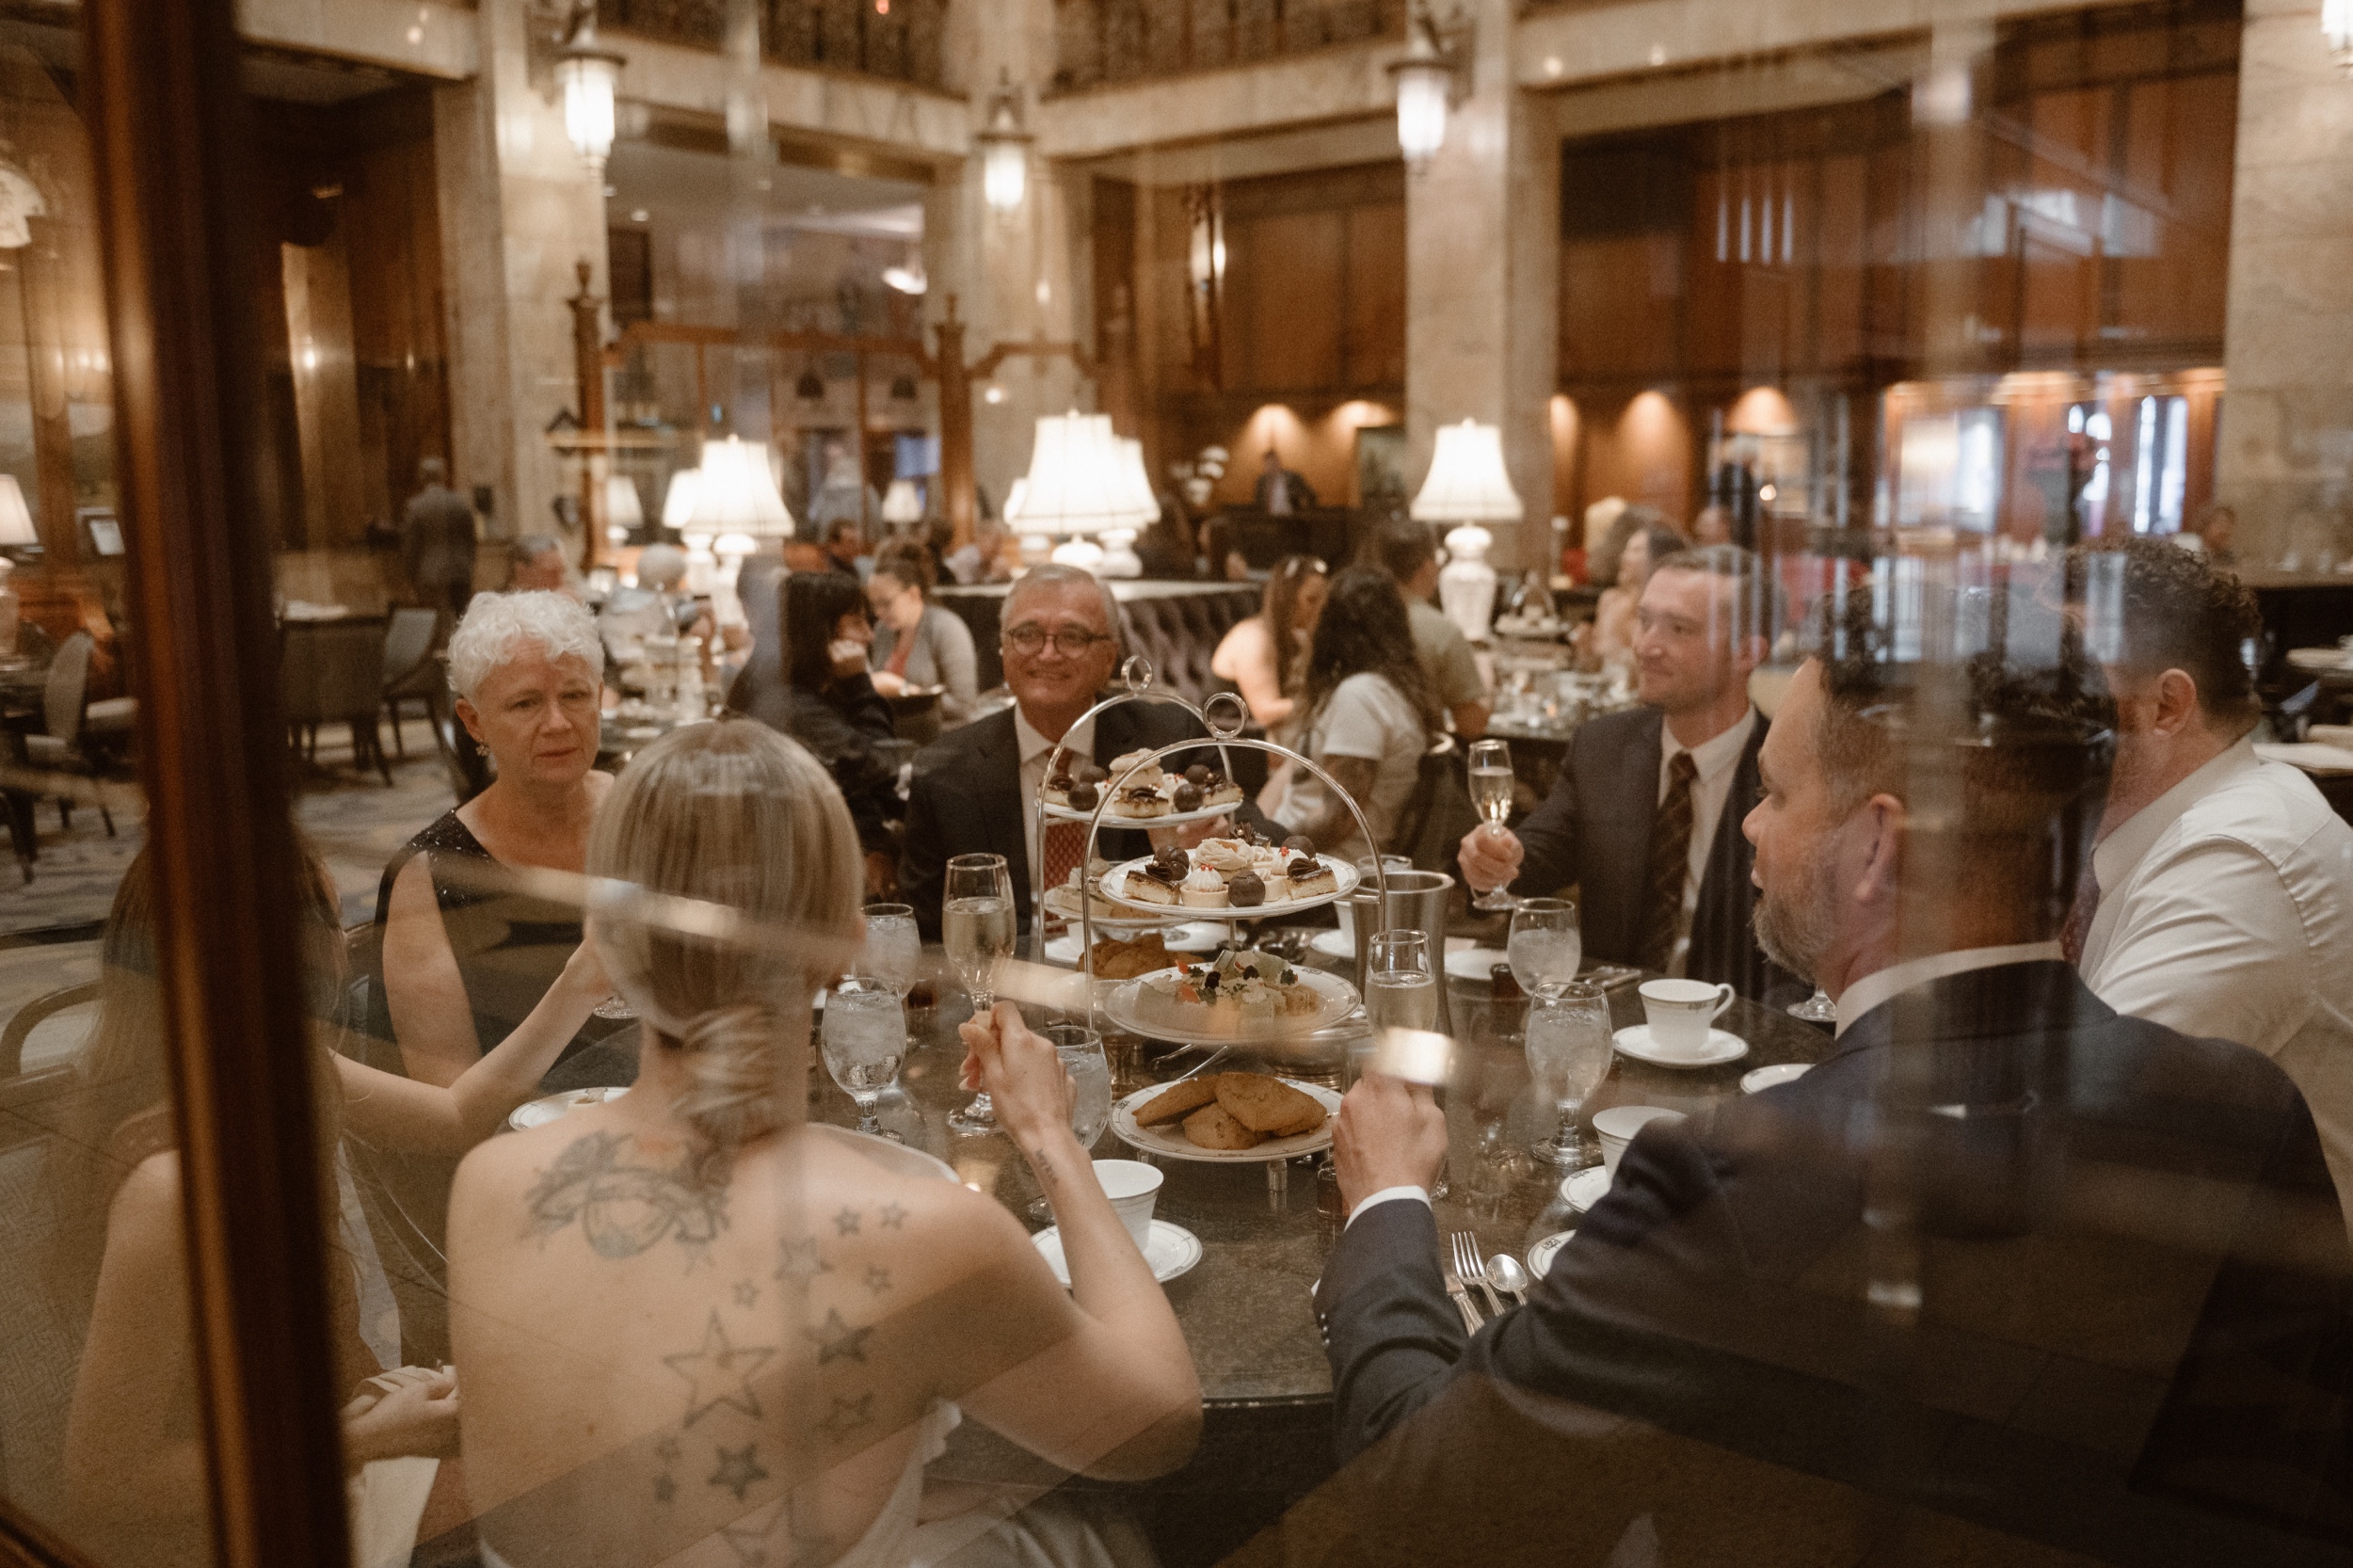 A bride and groom toast with their family members at their high tea wedding reception at the Brown Palace in Denver, Colorado. Photo by Denver wedding photographer Ashley Joyce.